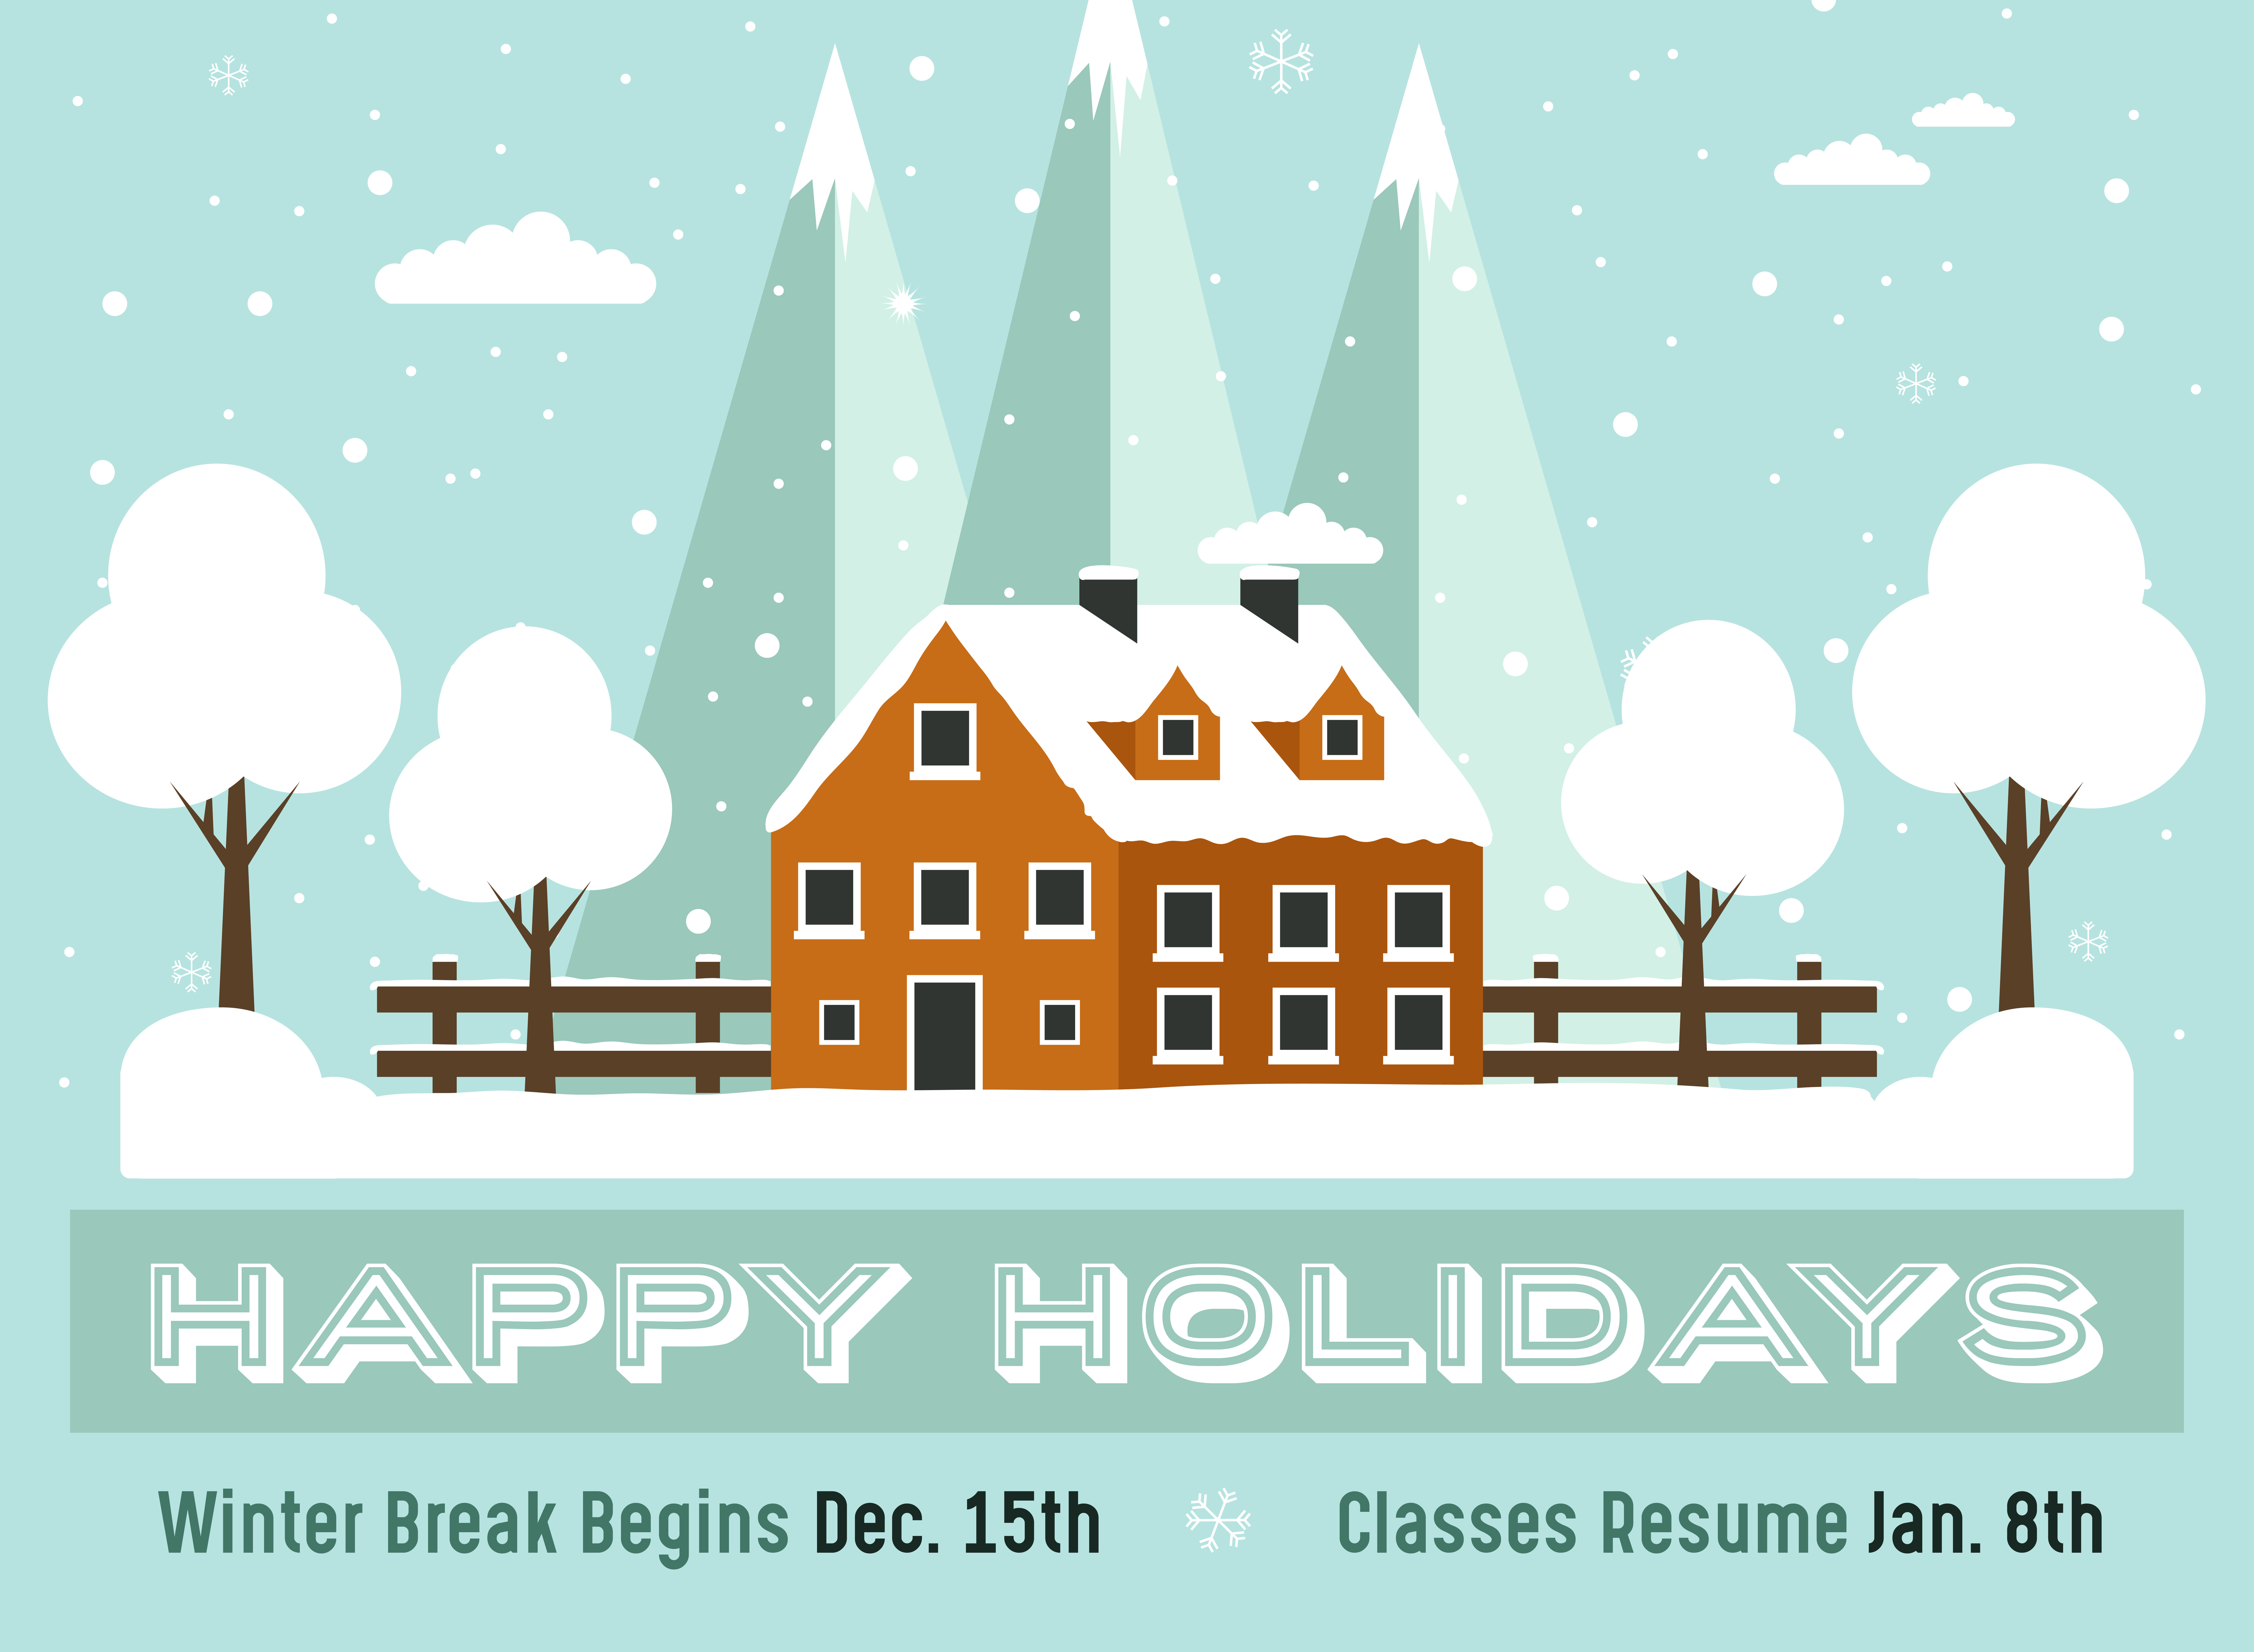 Happy Holidays, Gompers Prep!